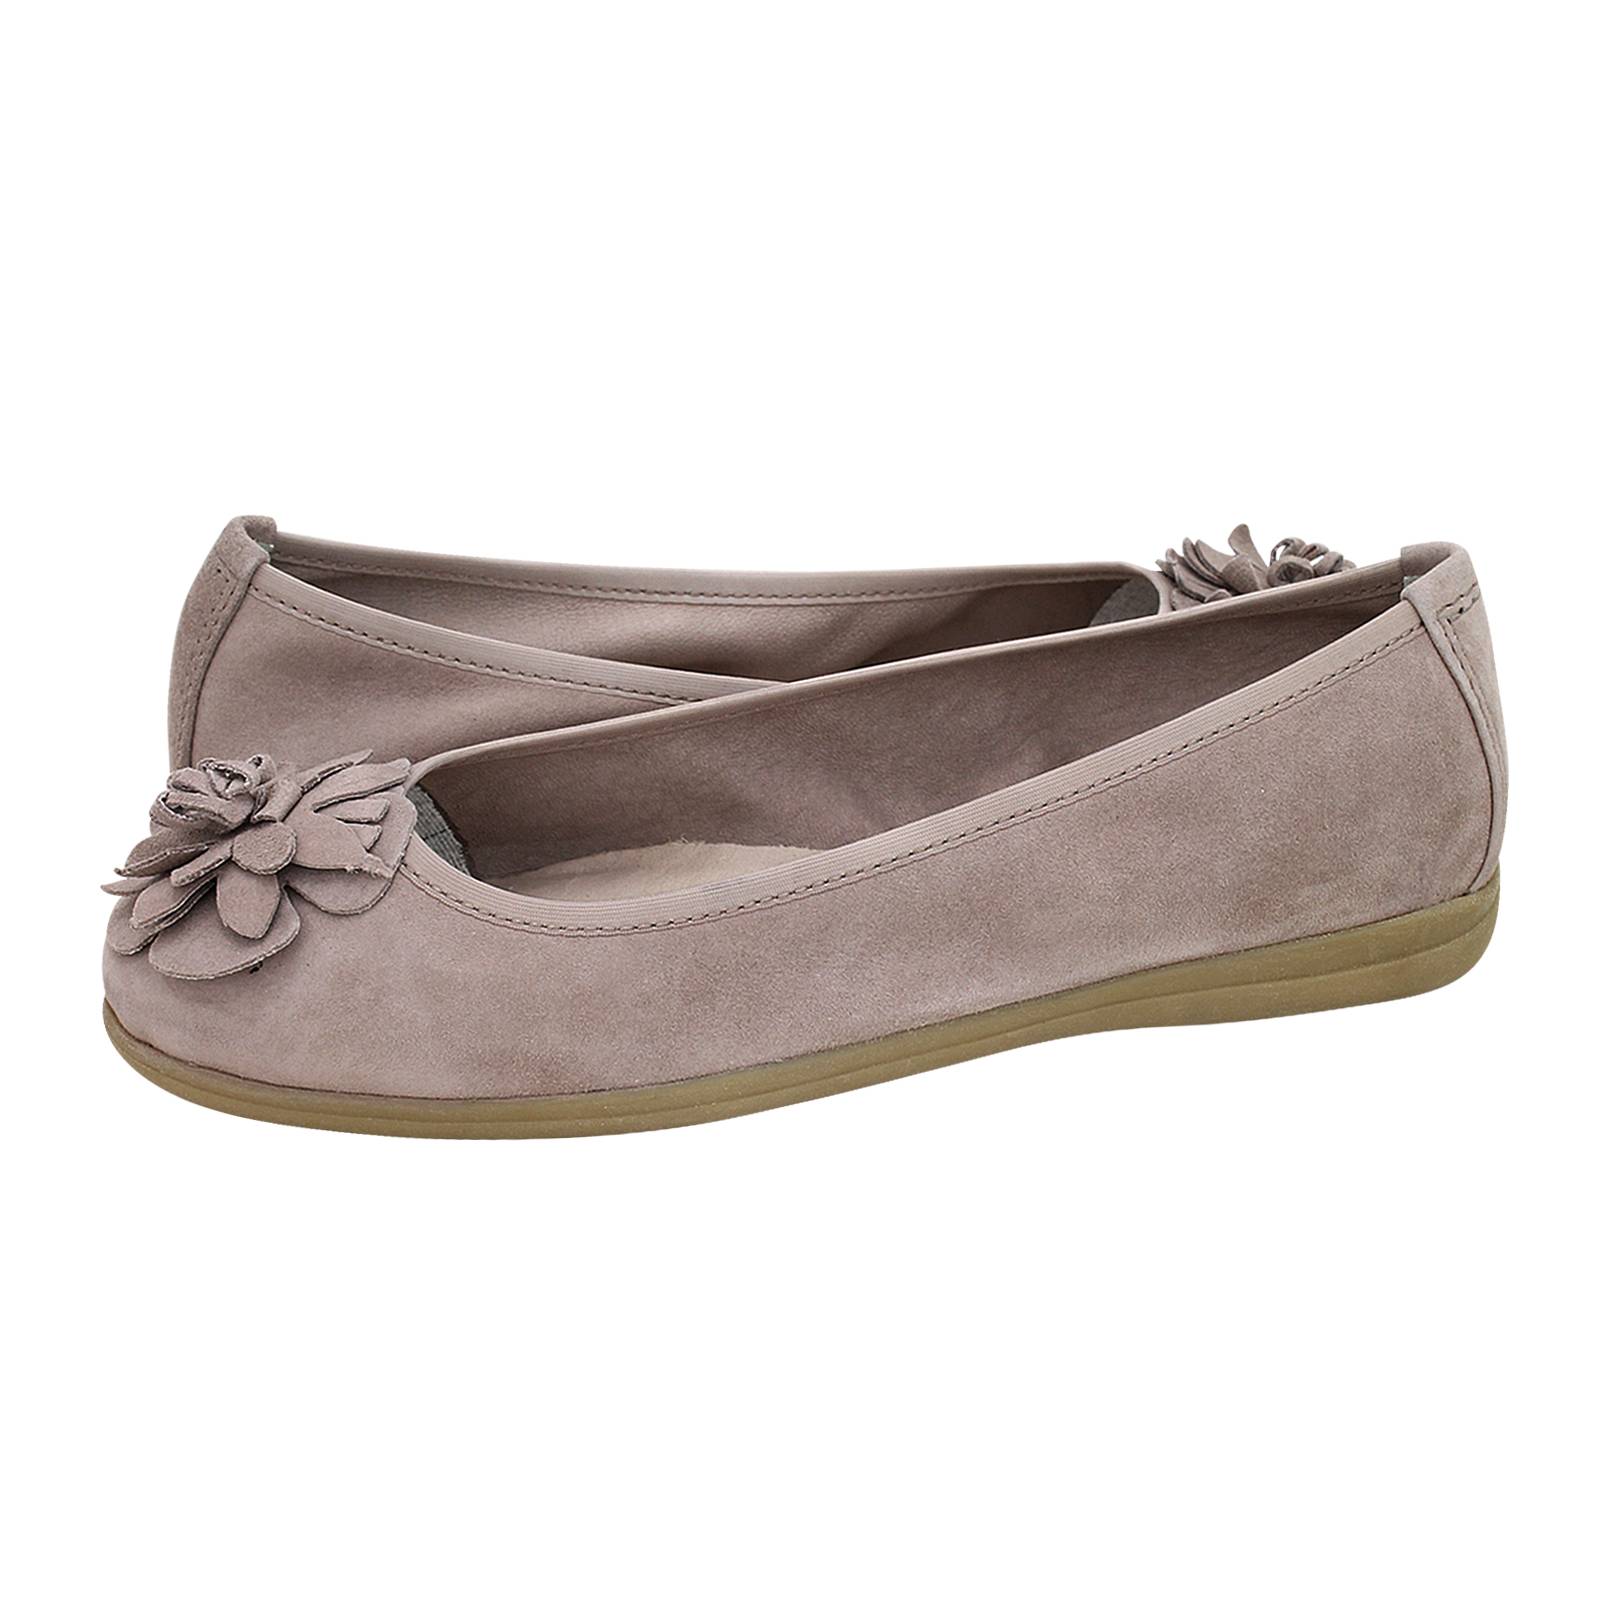 Raubling - ballerinas made of suede - Gianna Online